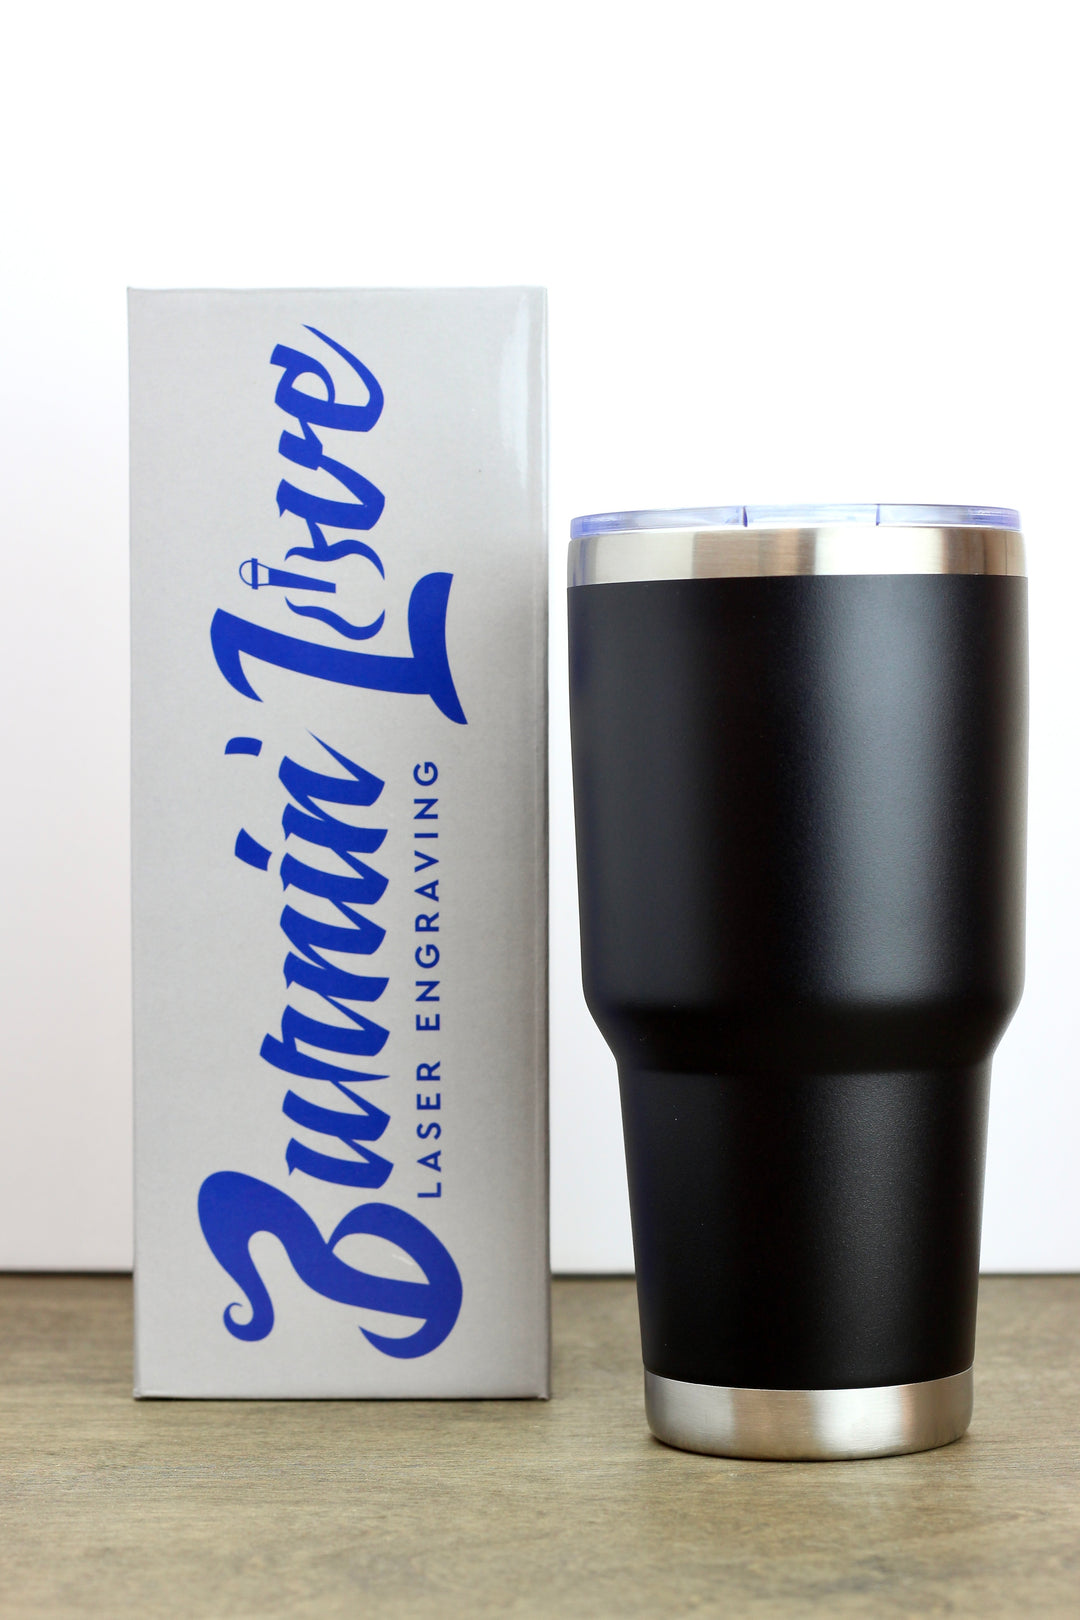 Swig Life Skinny Can Holders (laser engraving included) – Love and